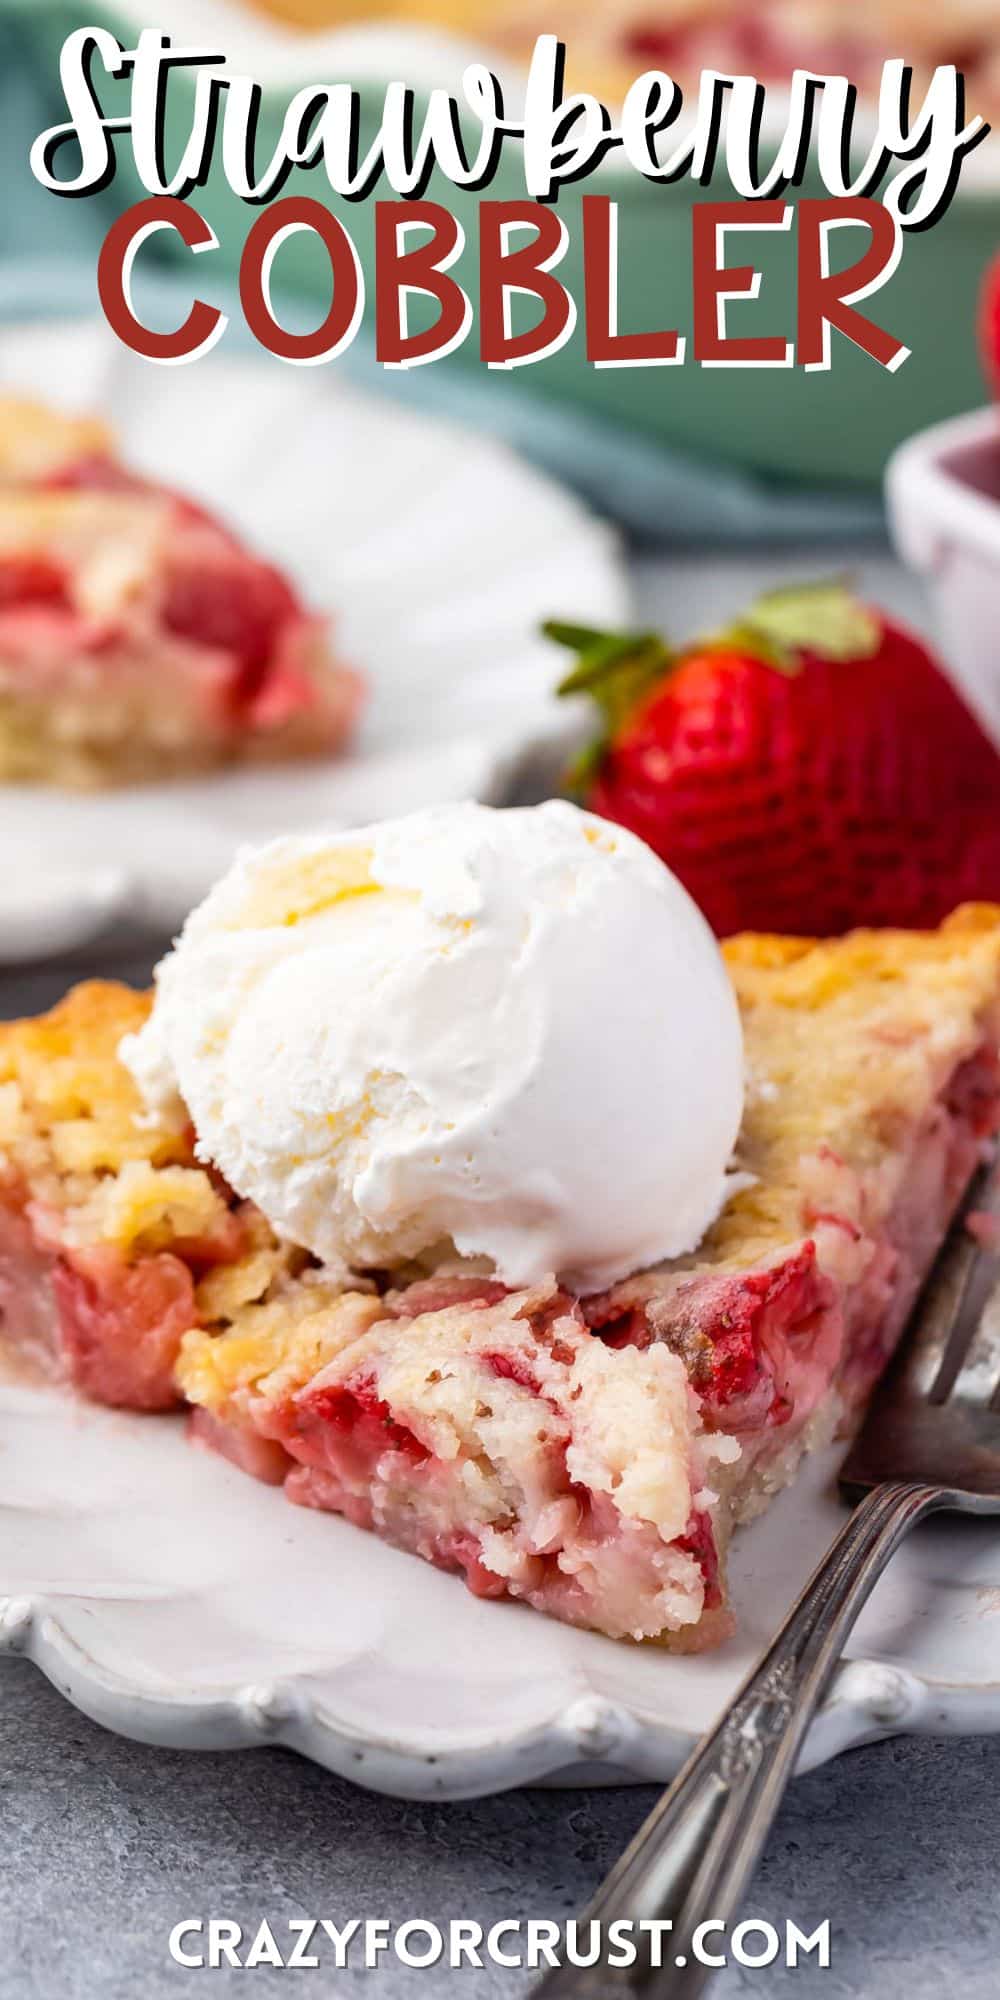 strawberry cobbler on a grey plate with ice cream on top with words on the image.